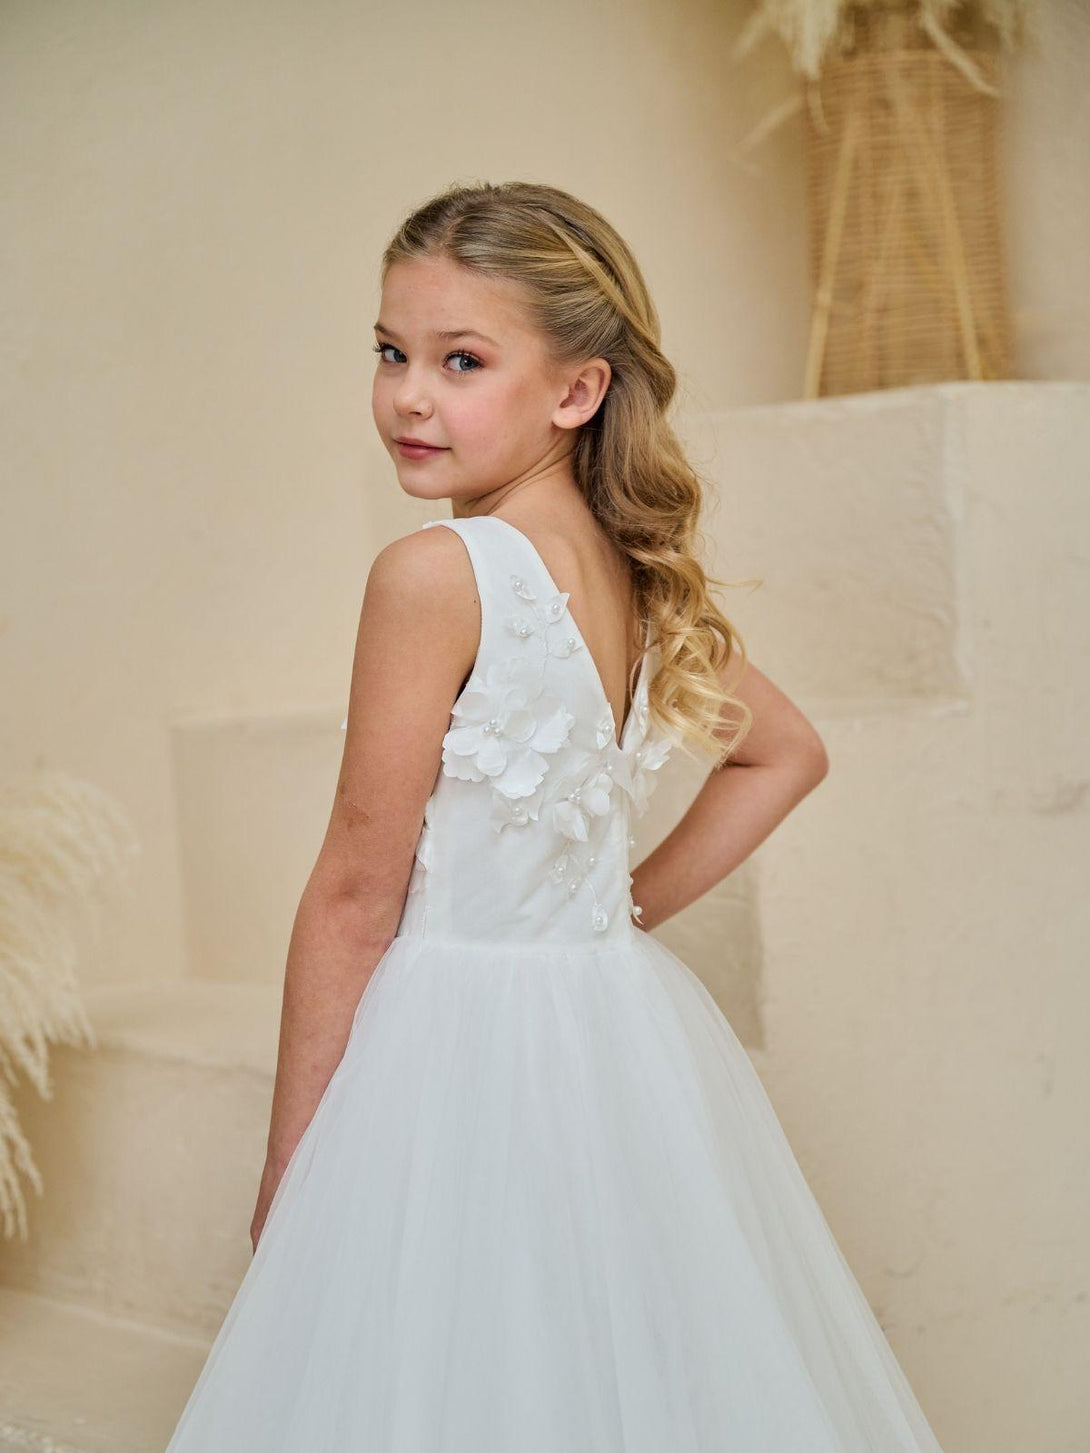 TETER WARM Communion Girls White Dress Occasion Flow Lace Princess Wear in New York